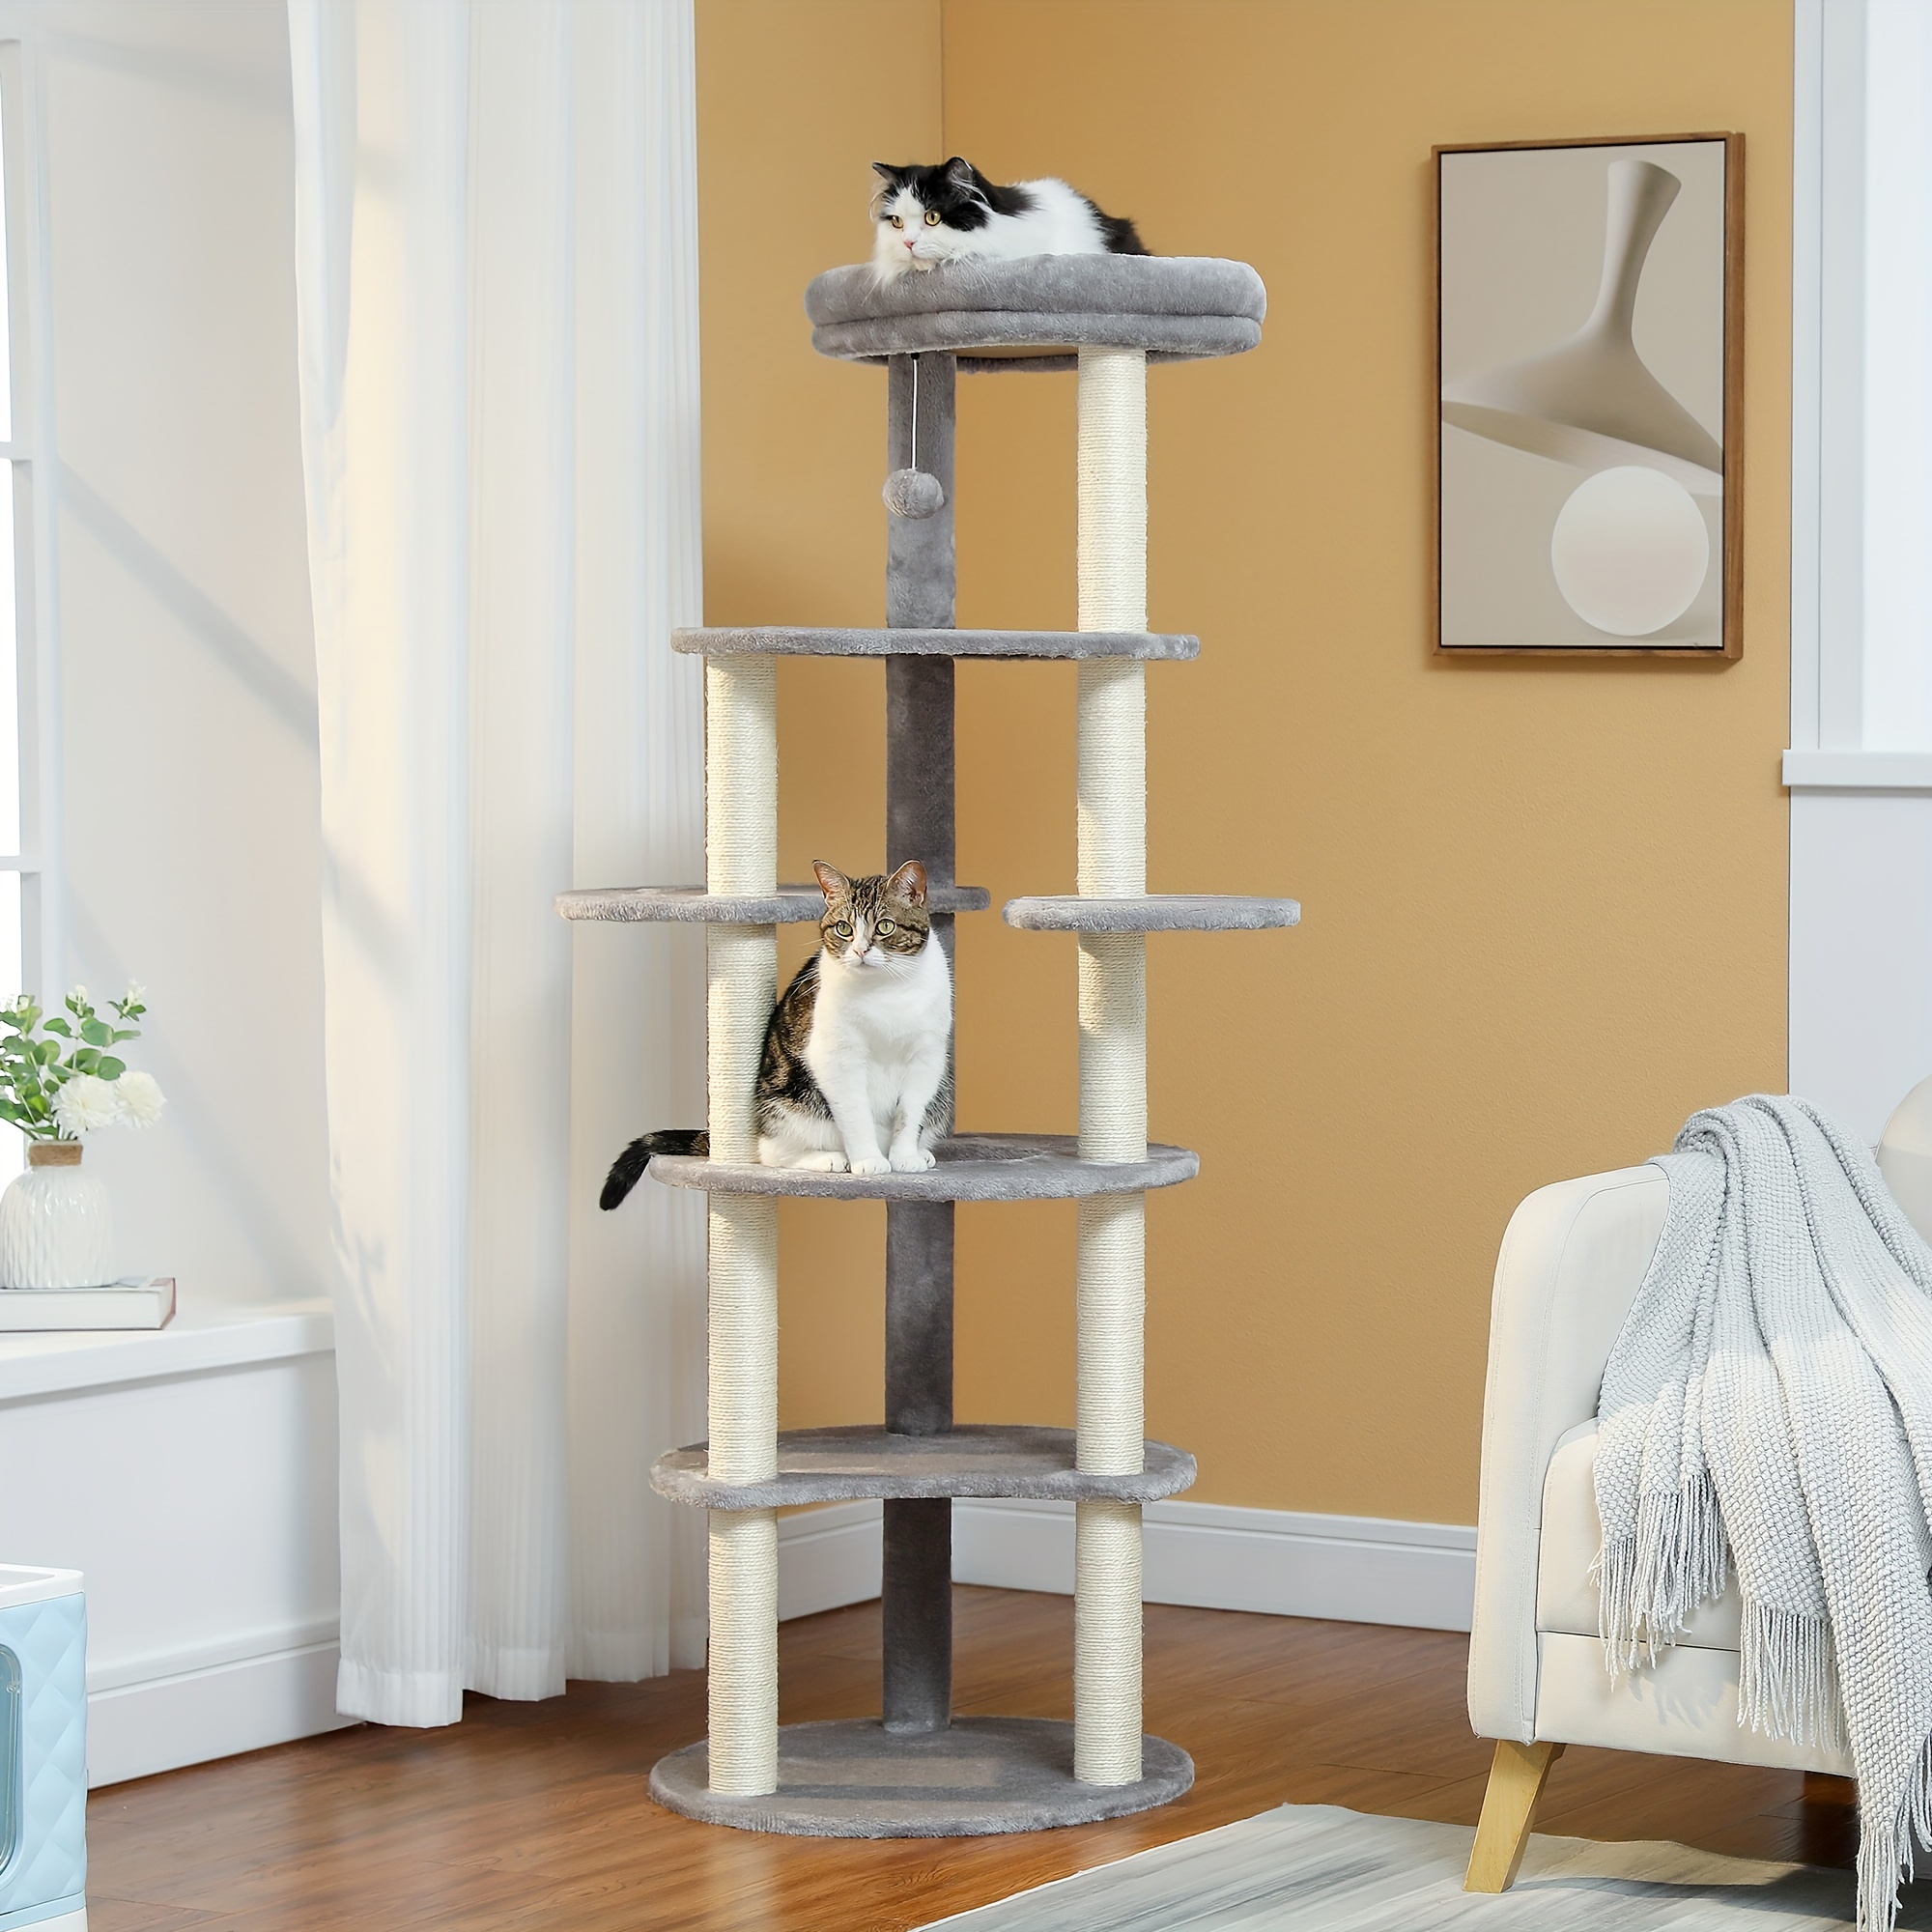 

61" Tall Cat Tree For Indoor Cats, 6-levels Cat Tower With 9 Sisal Scratching Posts And Replaceable Dangling Ball, Large Top Perch, Cat Activity Center, Funny Hanging Ball, Beige, Grey